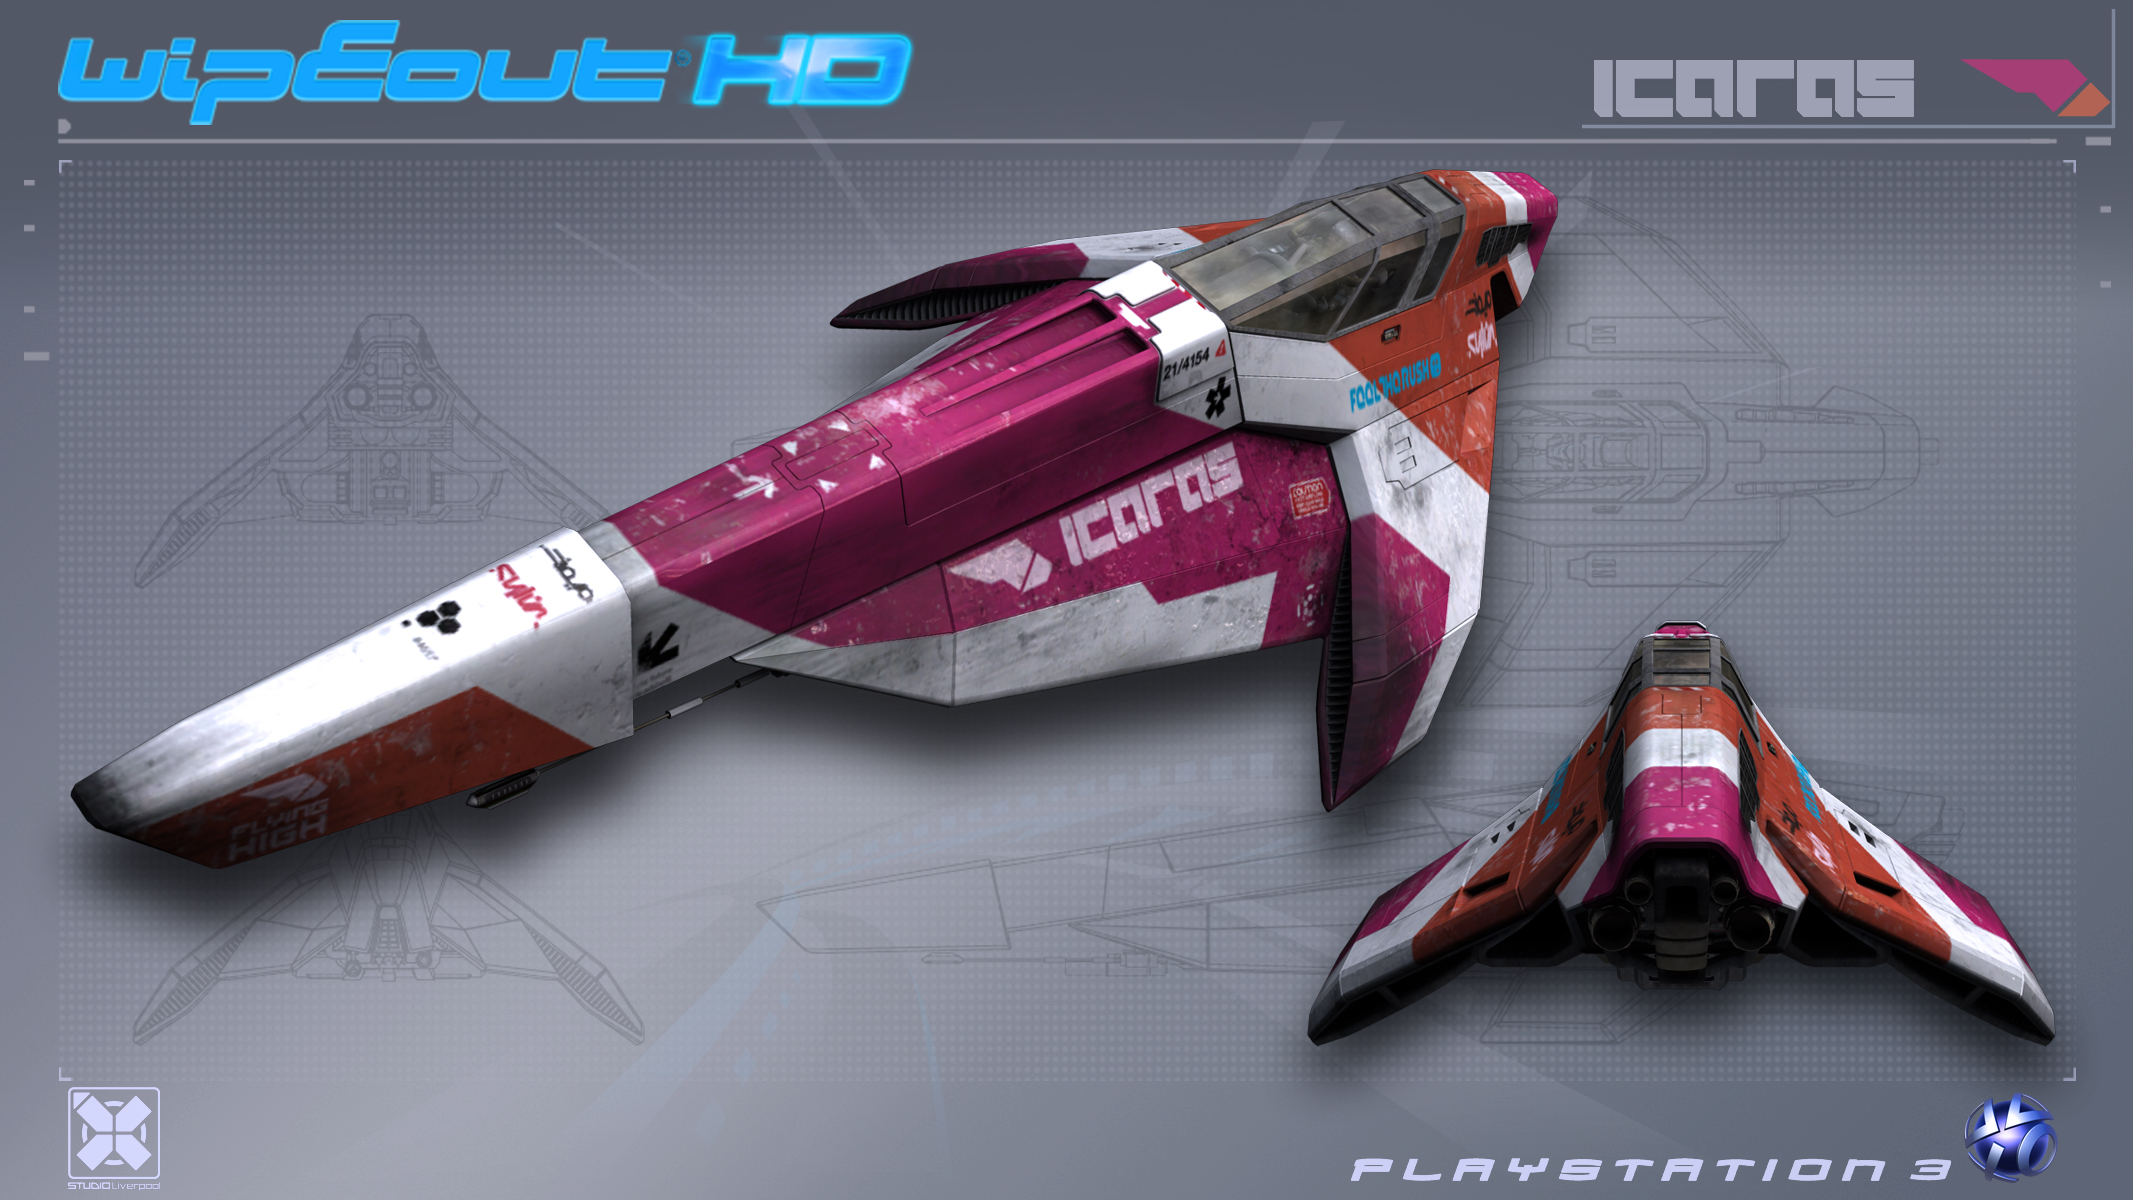 [LEGO] Moc Icaras version LEGO ( wipeout HD sur ps3). Icaras___WipEout_HD___PS3_by_nocomplys